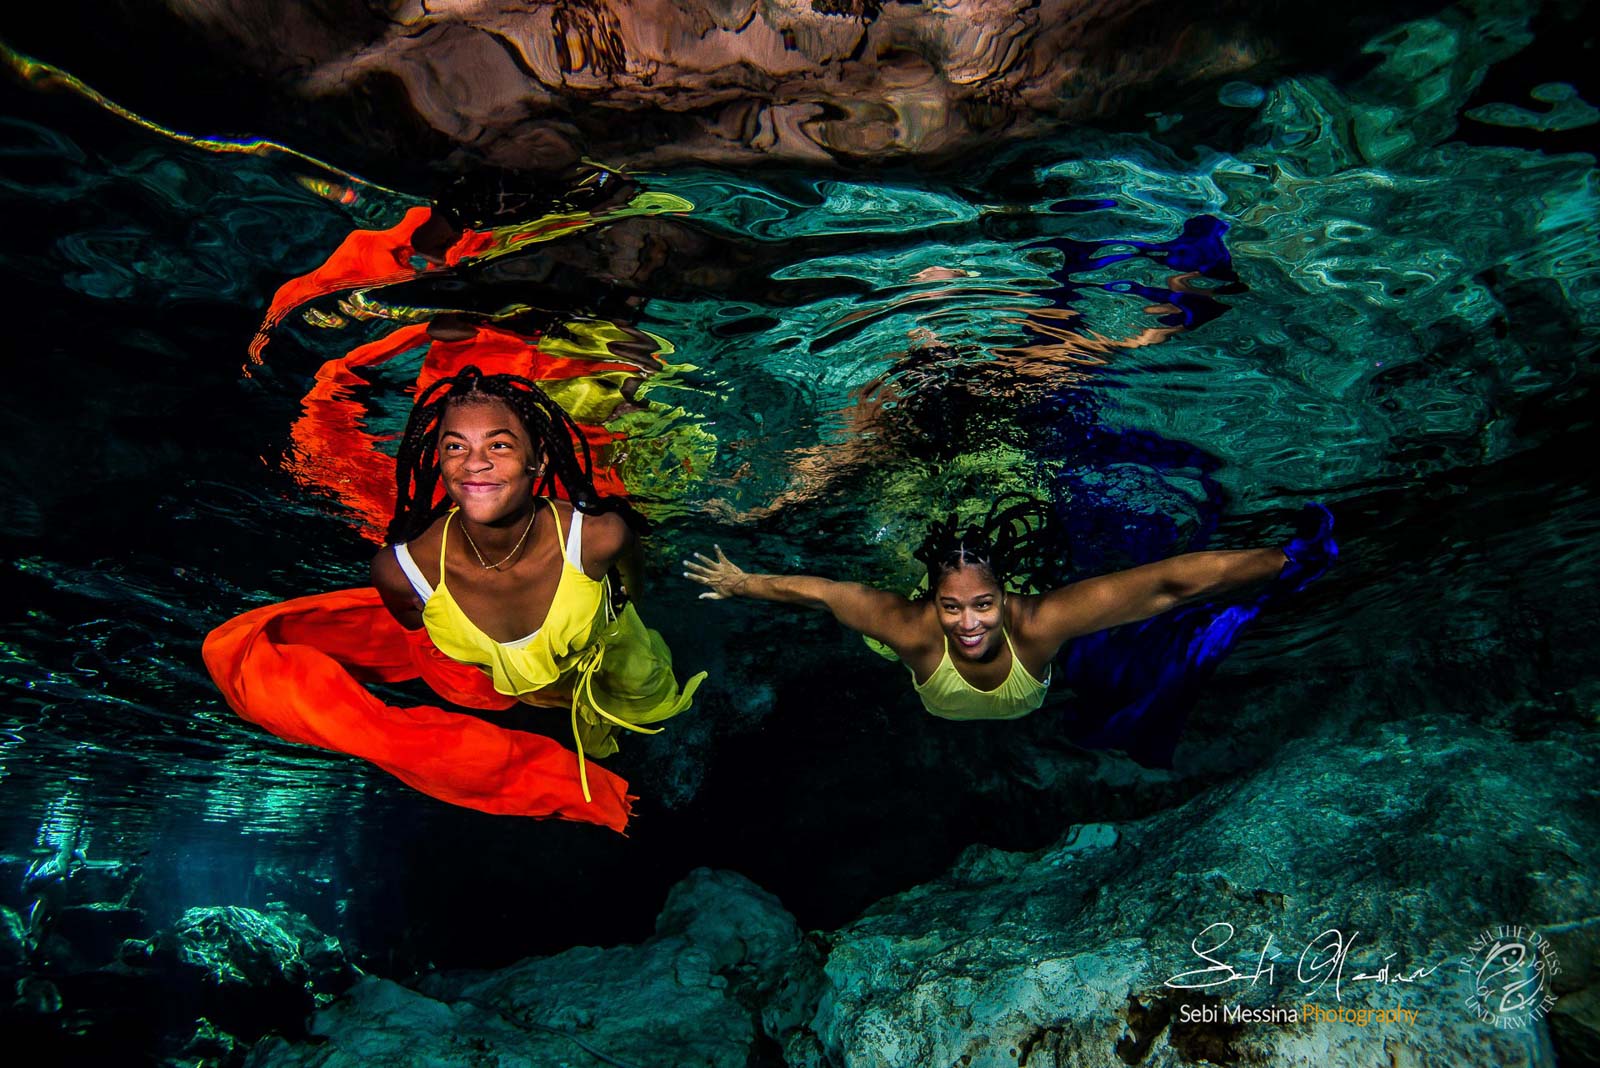 Mother and Daughter Underwater Photoshoot Mexico – Sebi Messina Photography